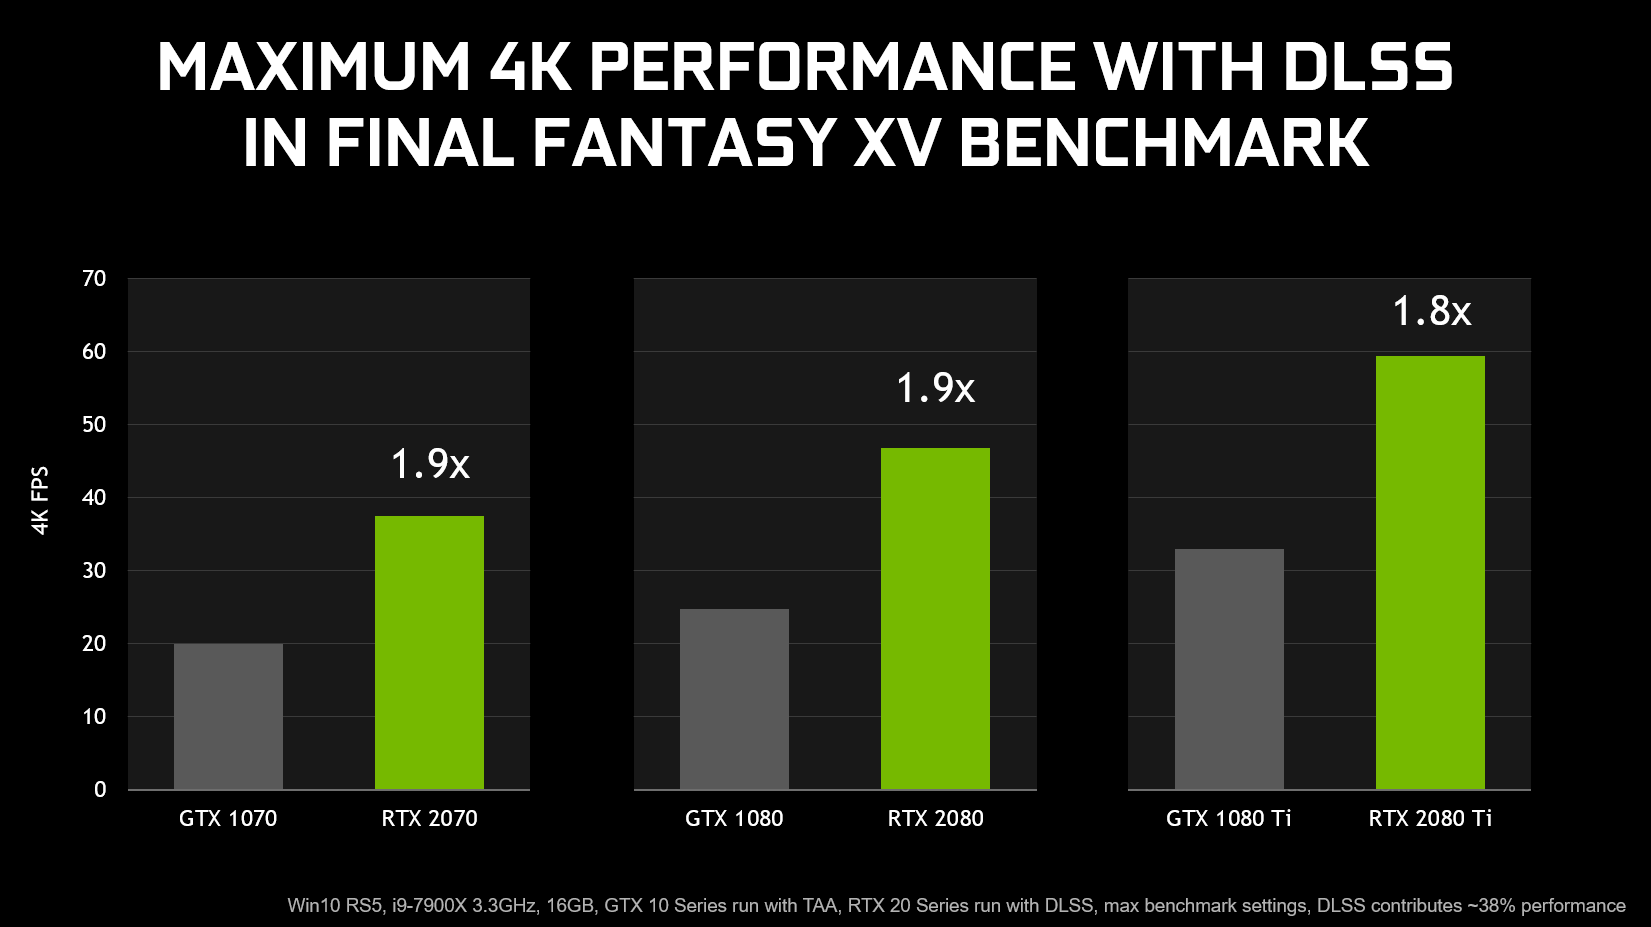 Tåre miles Framework Final Fantasy XV Benchmark Demonstrates The Benefits Of GeForce RTX and  DLSS. Download Now | GeForce News | NVIDIA